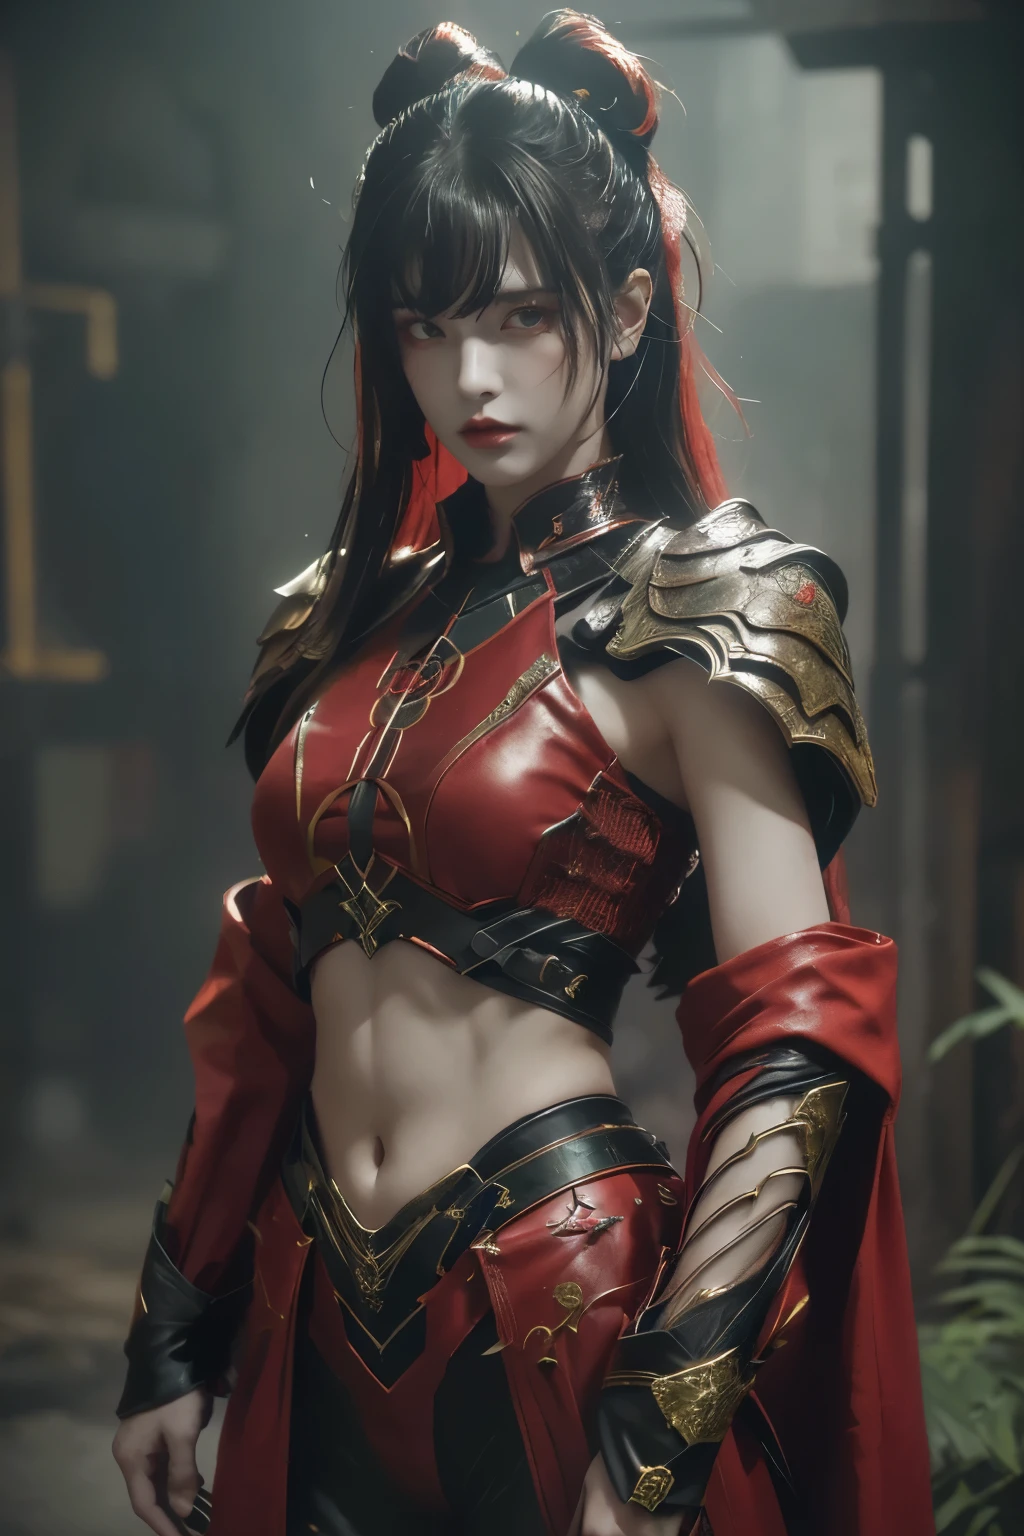 tmasterpiece,Best quality,A high resolution,8K,(Portrait photograph:1.5),(ROriginal photo),real photograph,digital photography,(Combination of cyberpunk and fantasy style),(Female soldier),20 year old girl,random hair style,By bangs,(Red eyeigchest, accessories,Redlip,(He frowned,Sneer),(Cyberpunk combined with fantasy style clothing,Openwork design,joint armor,police uniforms,Red clothes,Green),exposing your navel,Photo pose,Realisticstyle,Thunder and lightning on rainy day,(Thunder magic),oc render reflection texture